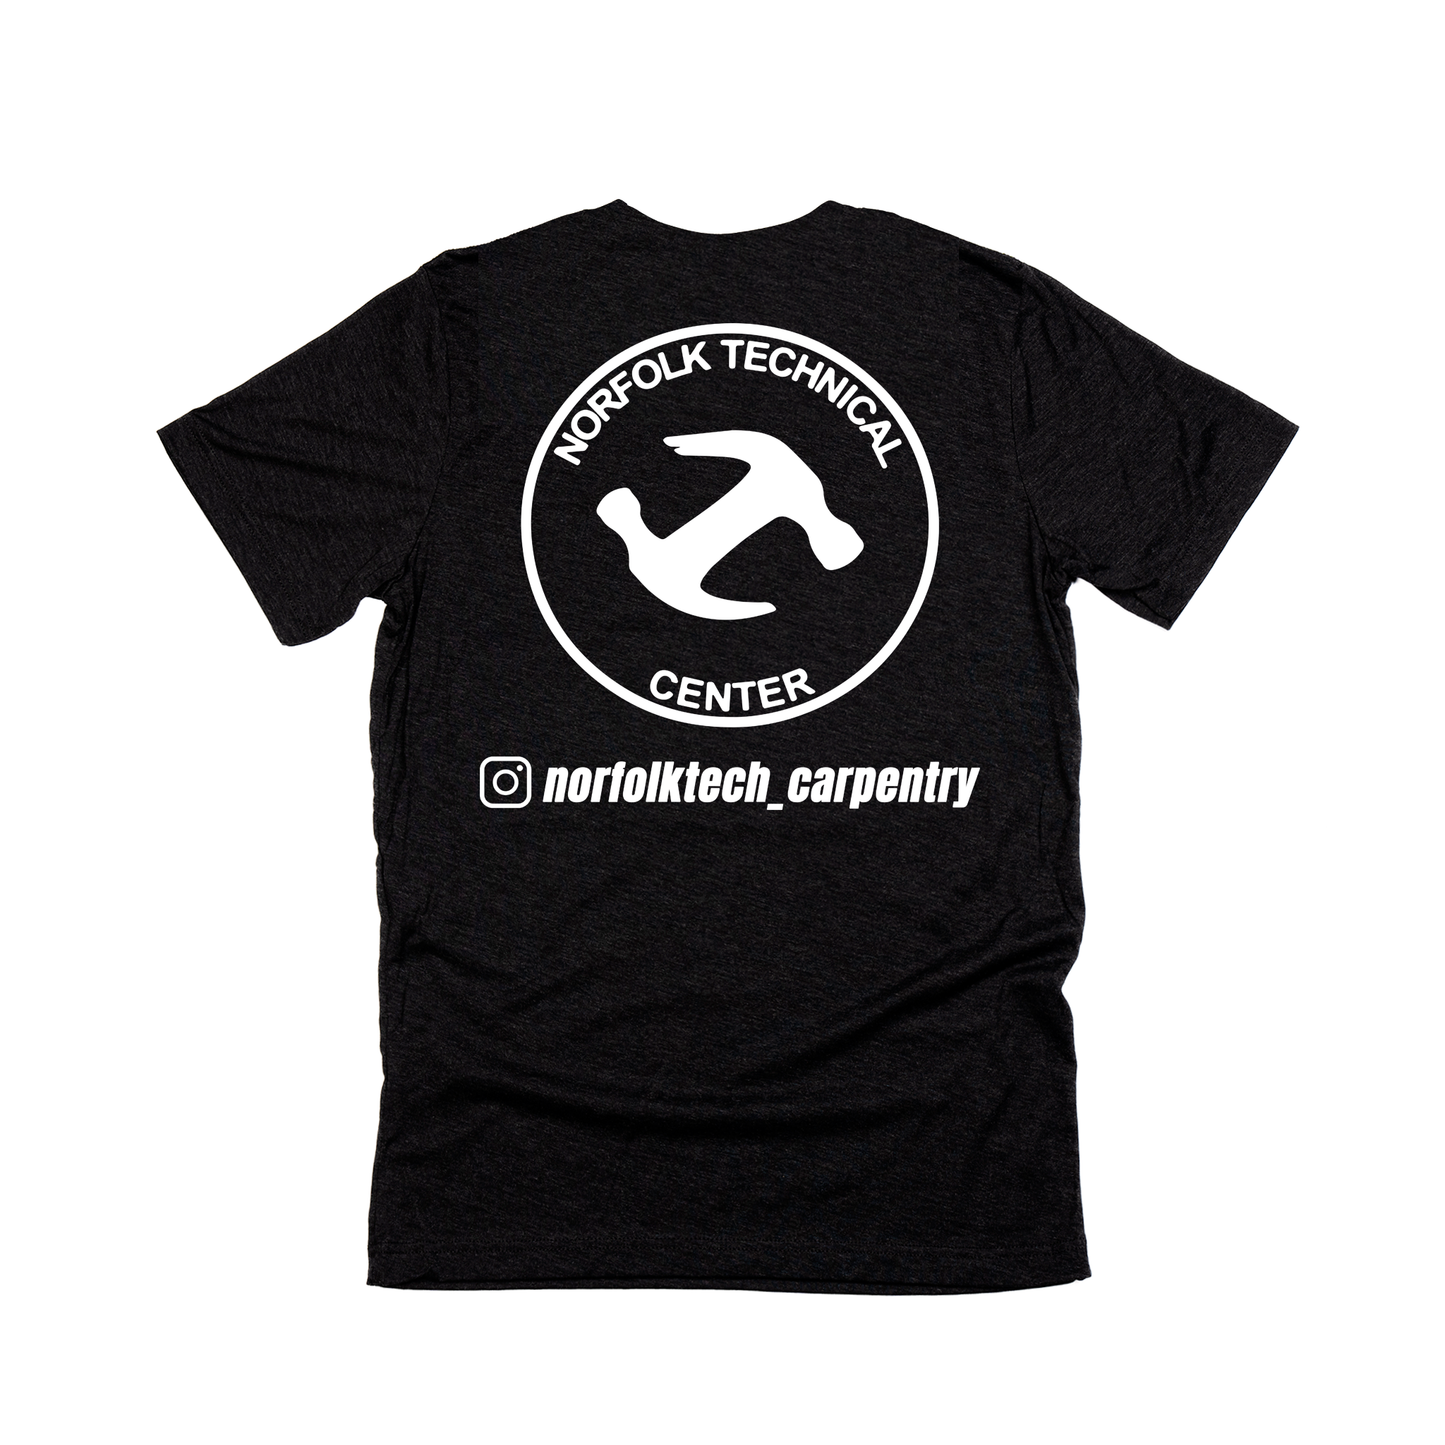 Carpentry (White, Across Front) & Norfolk Technical Center and Instagram Handle (White, Back) - Tee (BELLA + CANVAS - 3006 - Black)